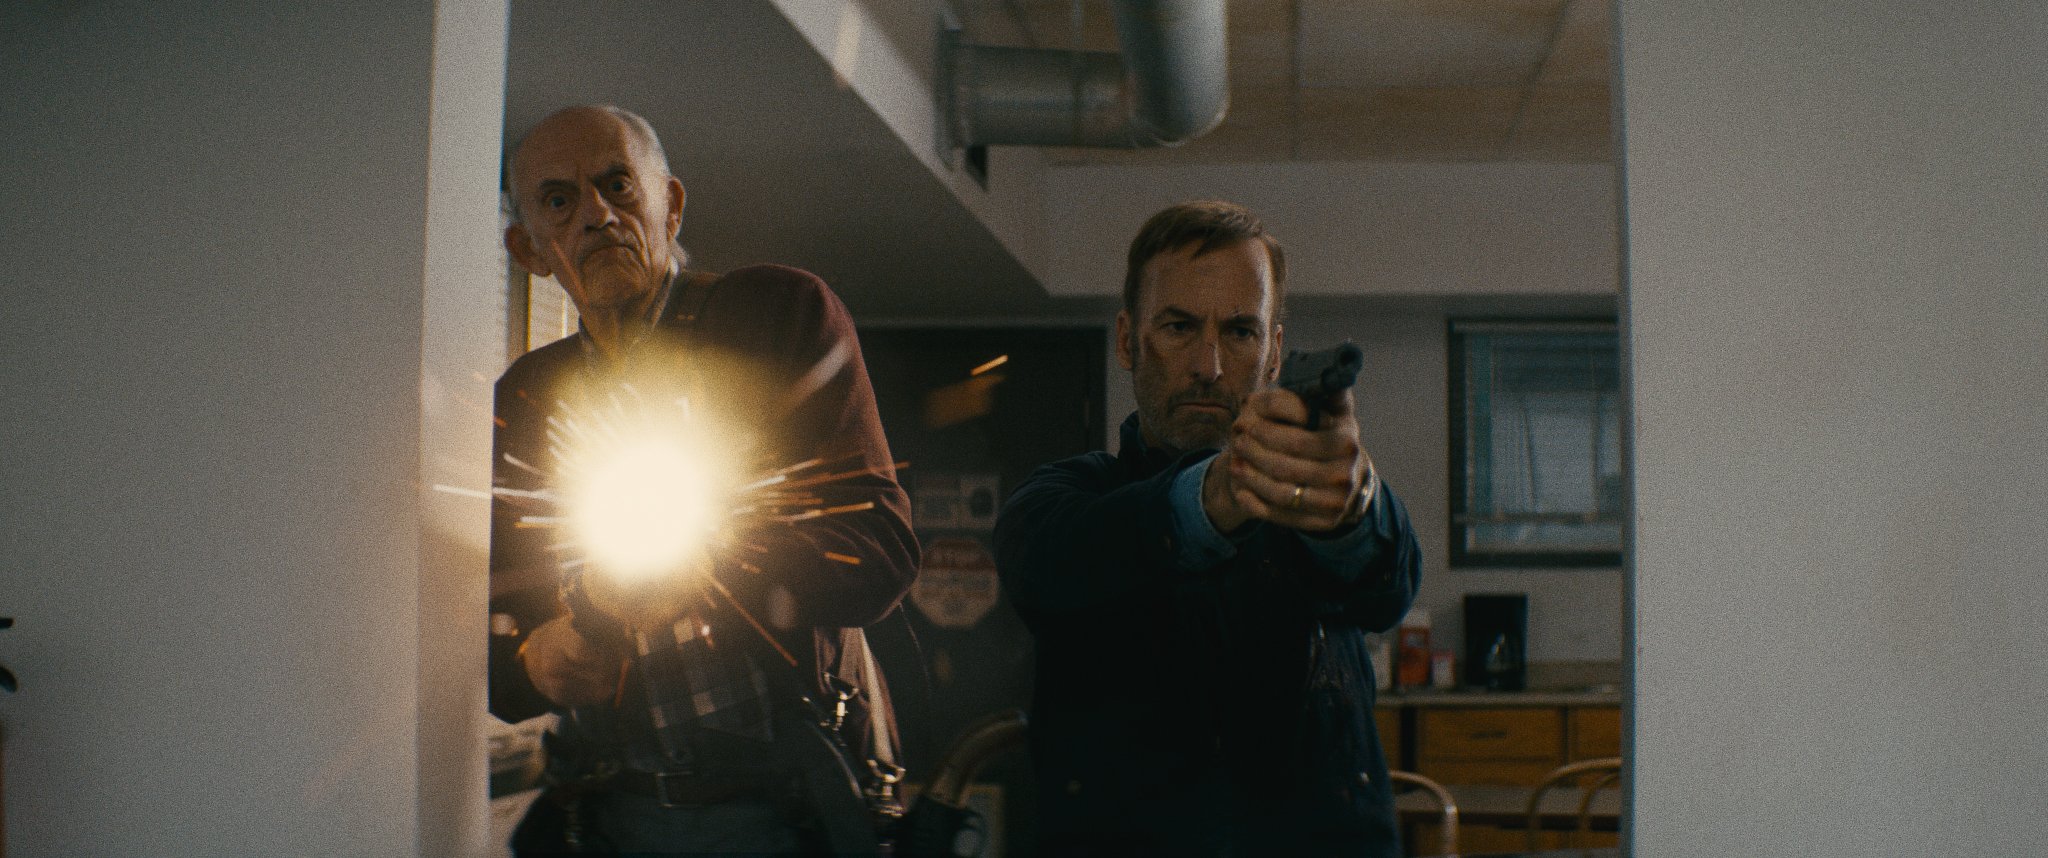 Christopher Lloyd and Bob Odenkirk shoot guns together